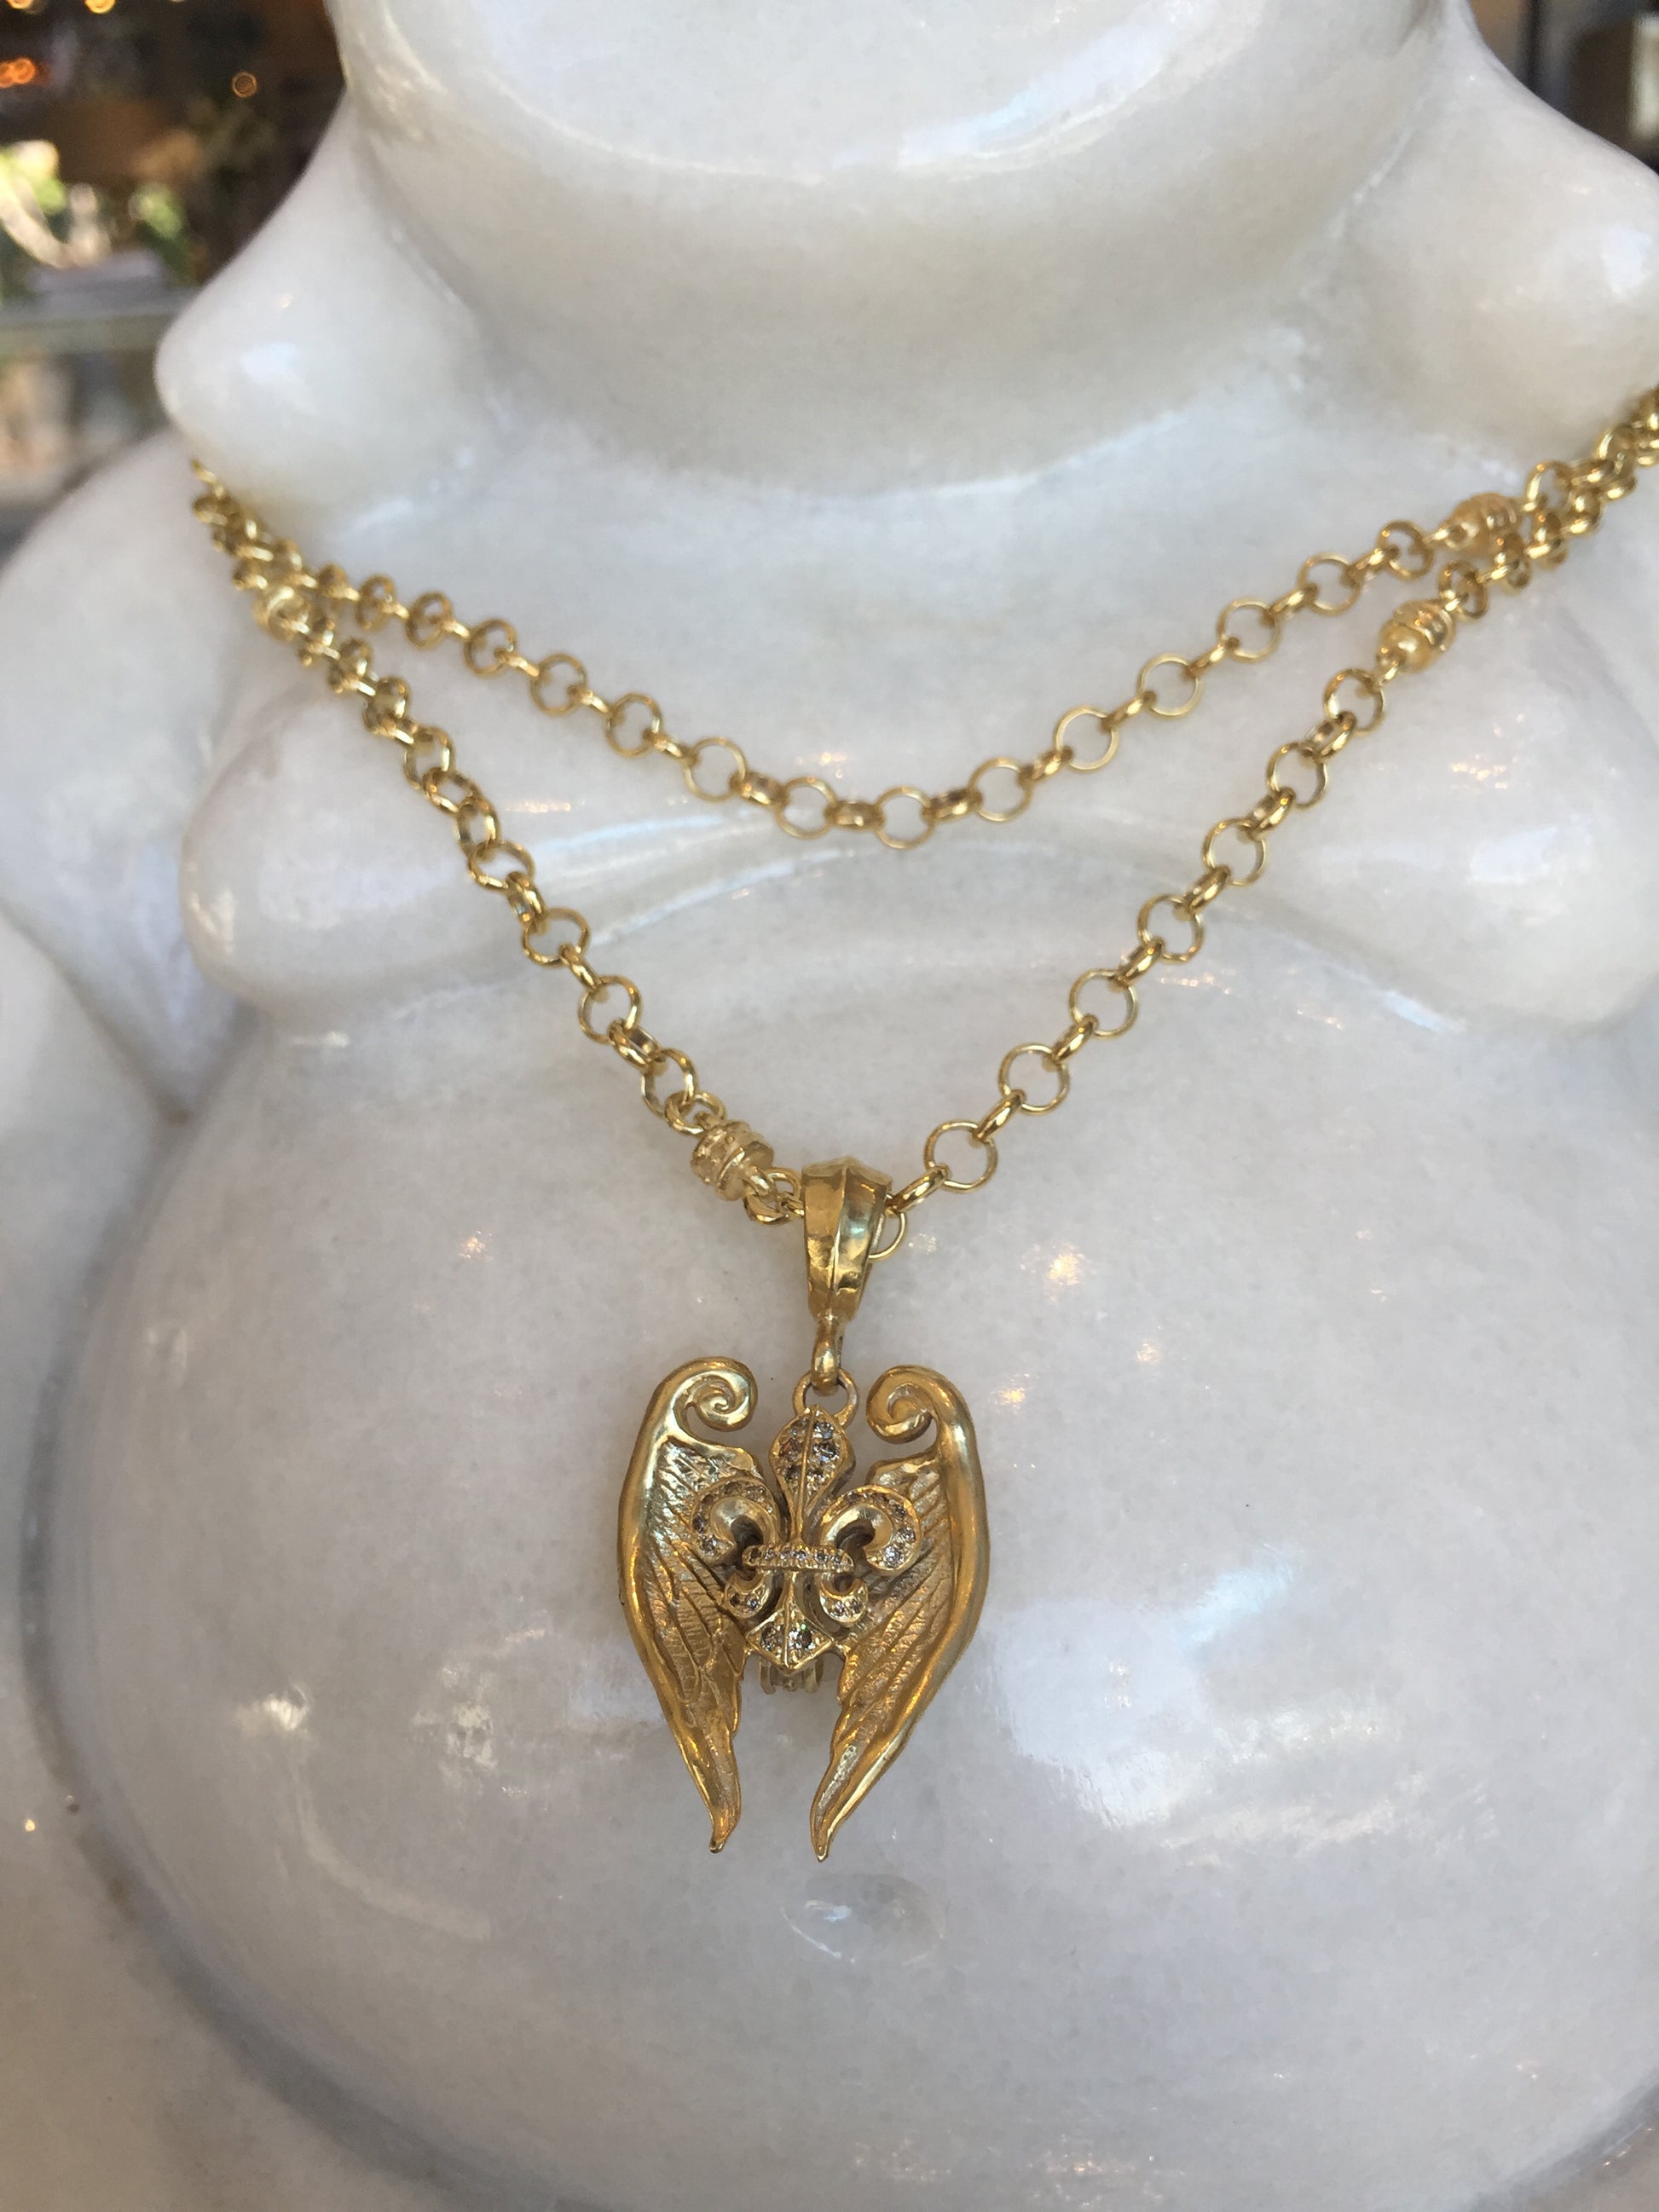 Necklace - Golden Fleur de Lis with Angel Wings in silver plated with 18k gold by Roman Paul